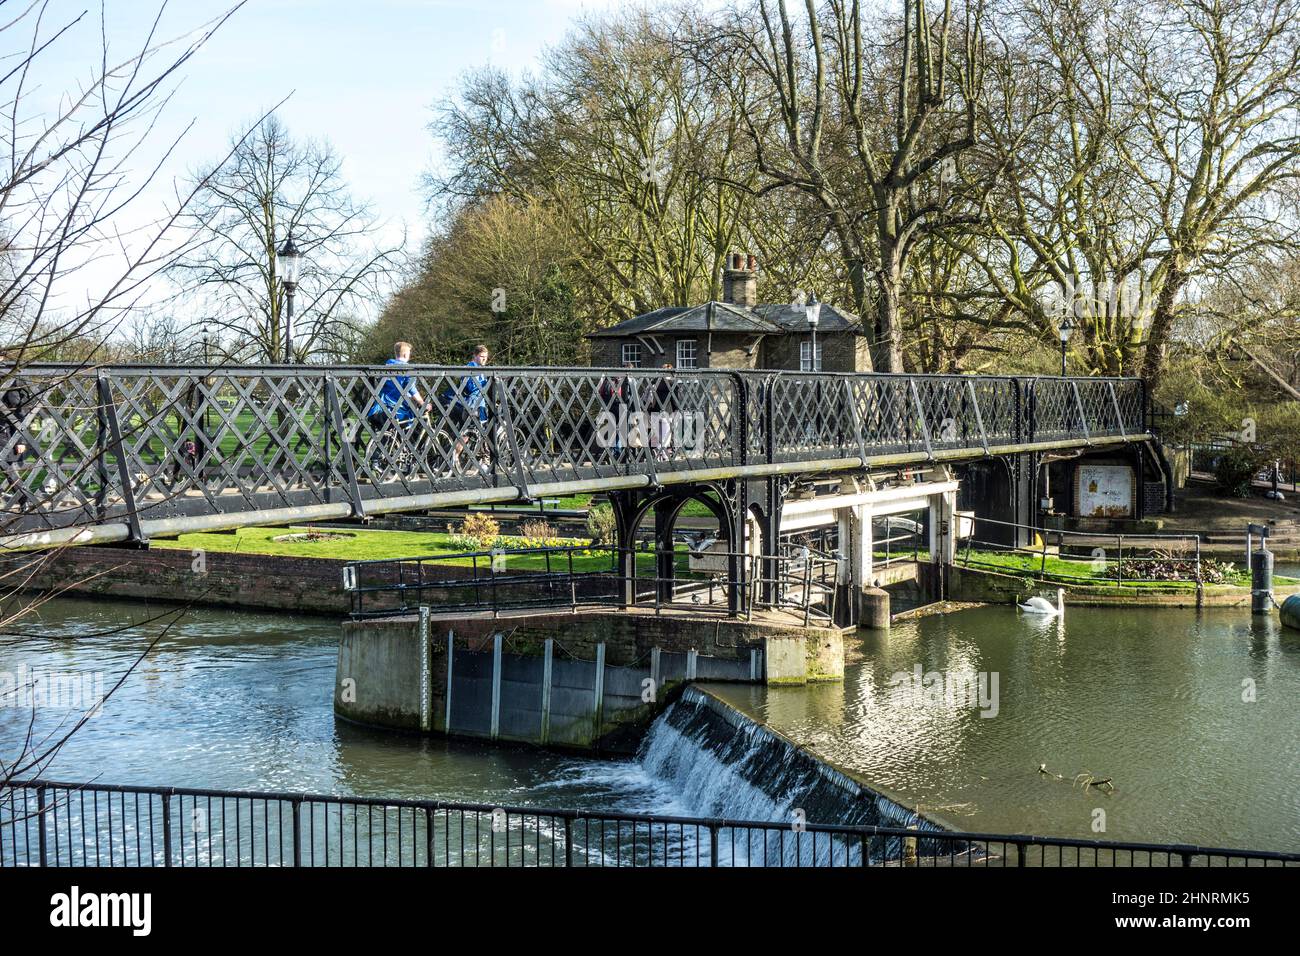 people crossing the river cam at an old iron pedestrian bridge Stock Photo